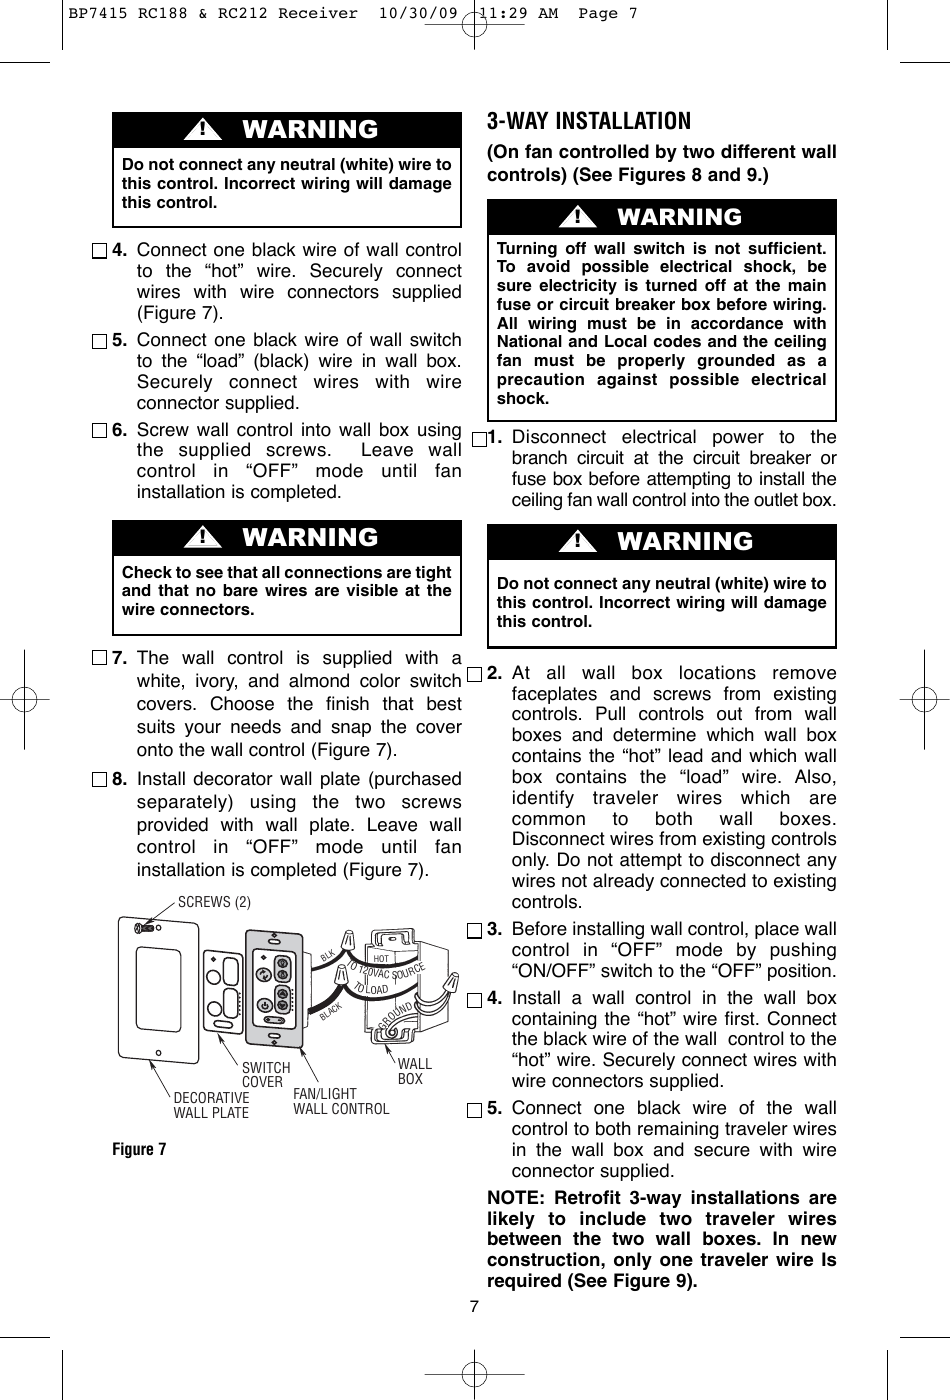 Page 7 of 12 - Emerson Emerson-Rc188-Owners-Manual- BP7415 RC188 & RC212 Receiver  Emerson-rc188-owners-manual